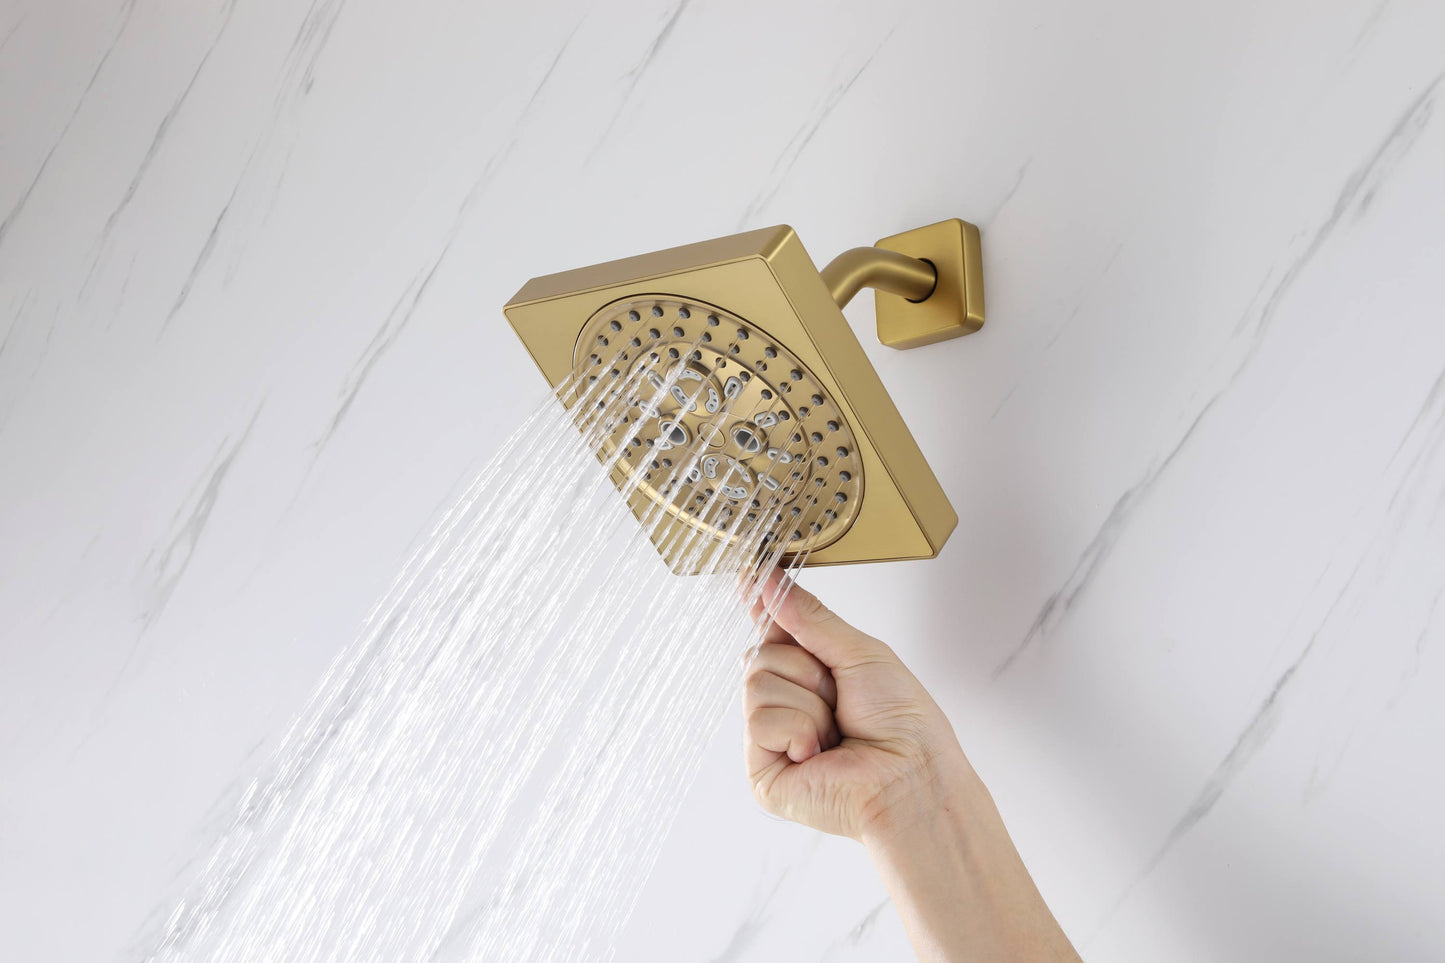 12-inch Or 16-inch Or 6'' Wall-Mount Brushed Gold 3-Way Thermostatic Shower Valve System: Versatile Functionality and Stunning Design